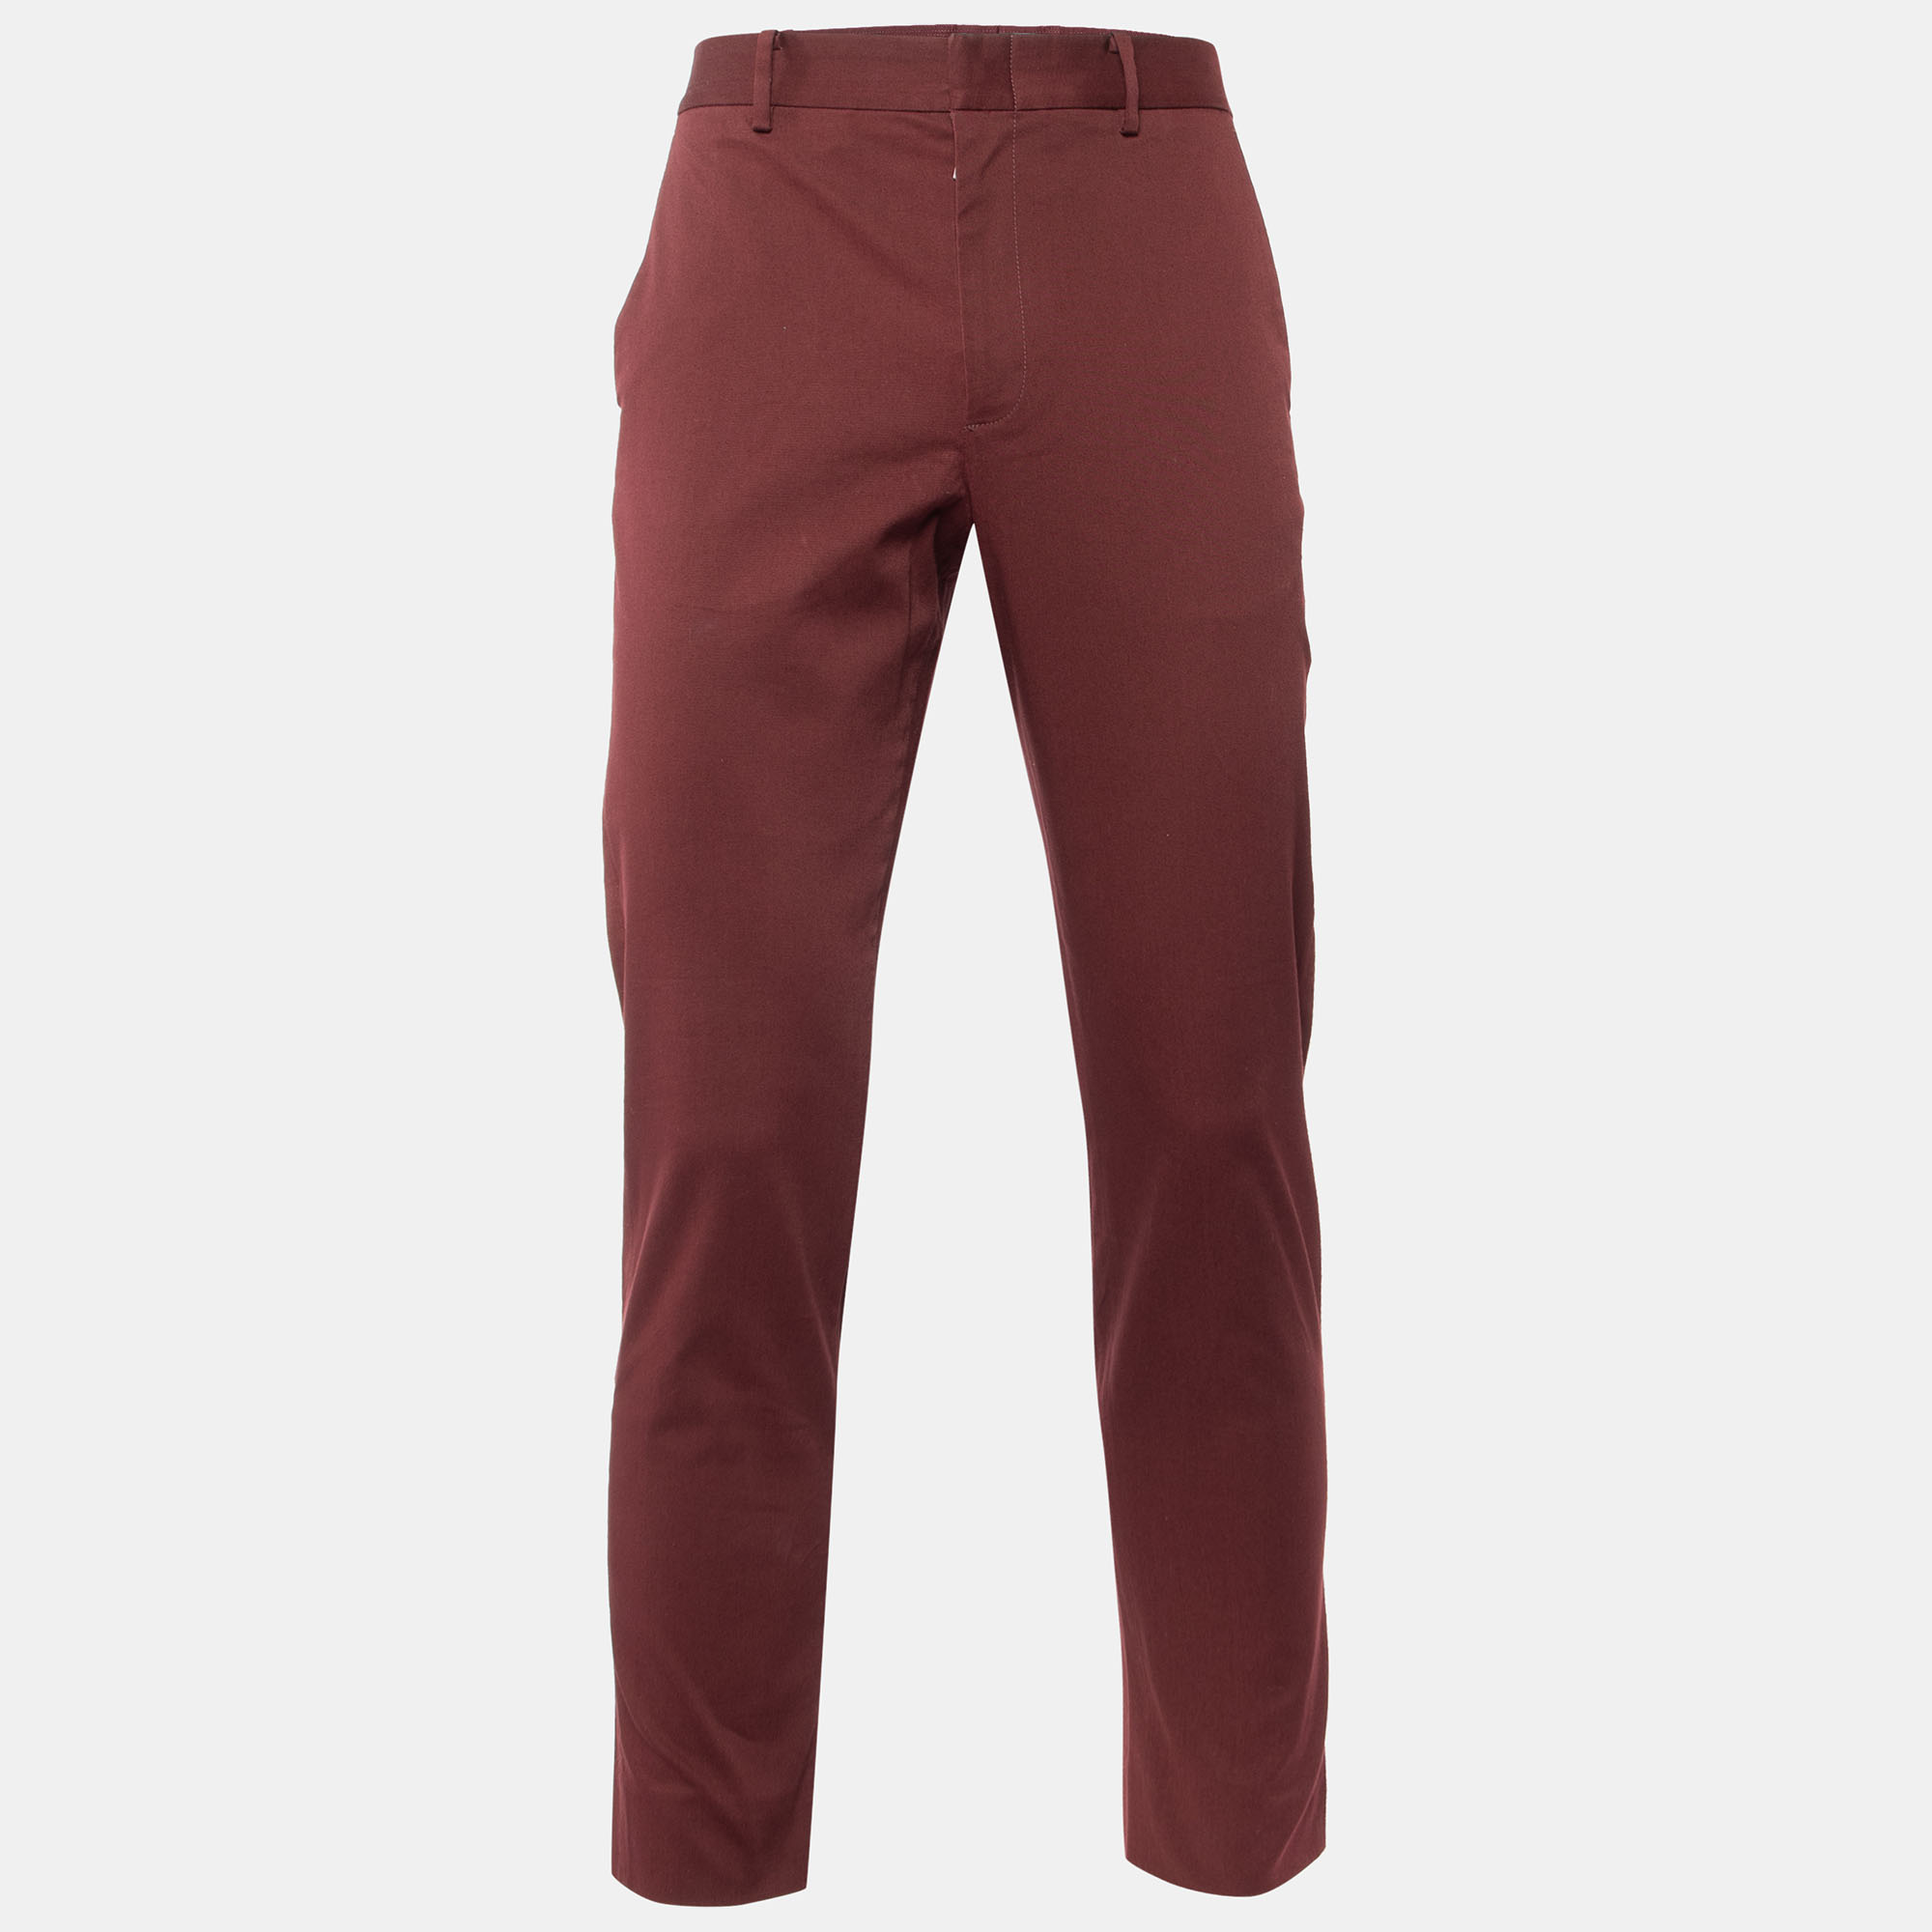 

Gucci Burnt Maroon Cotton Slim Fit Trousers, Burgundy